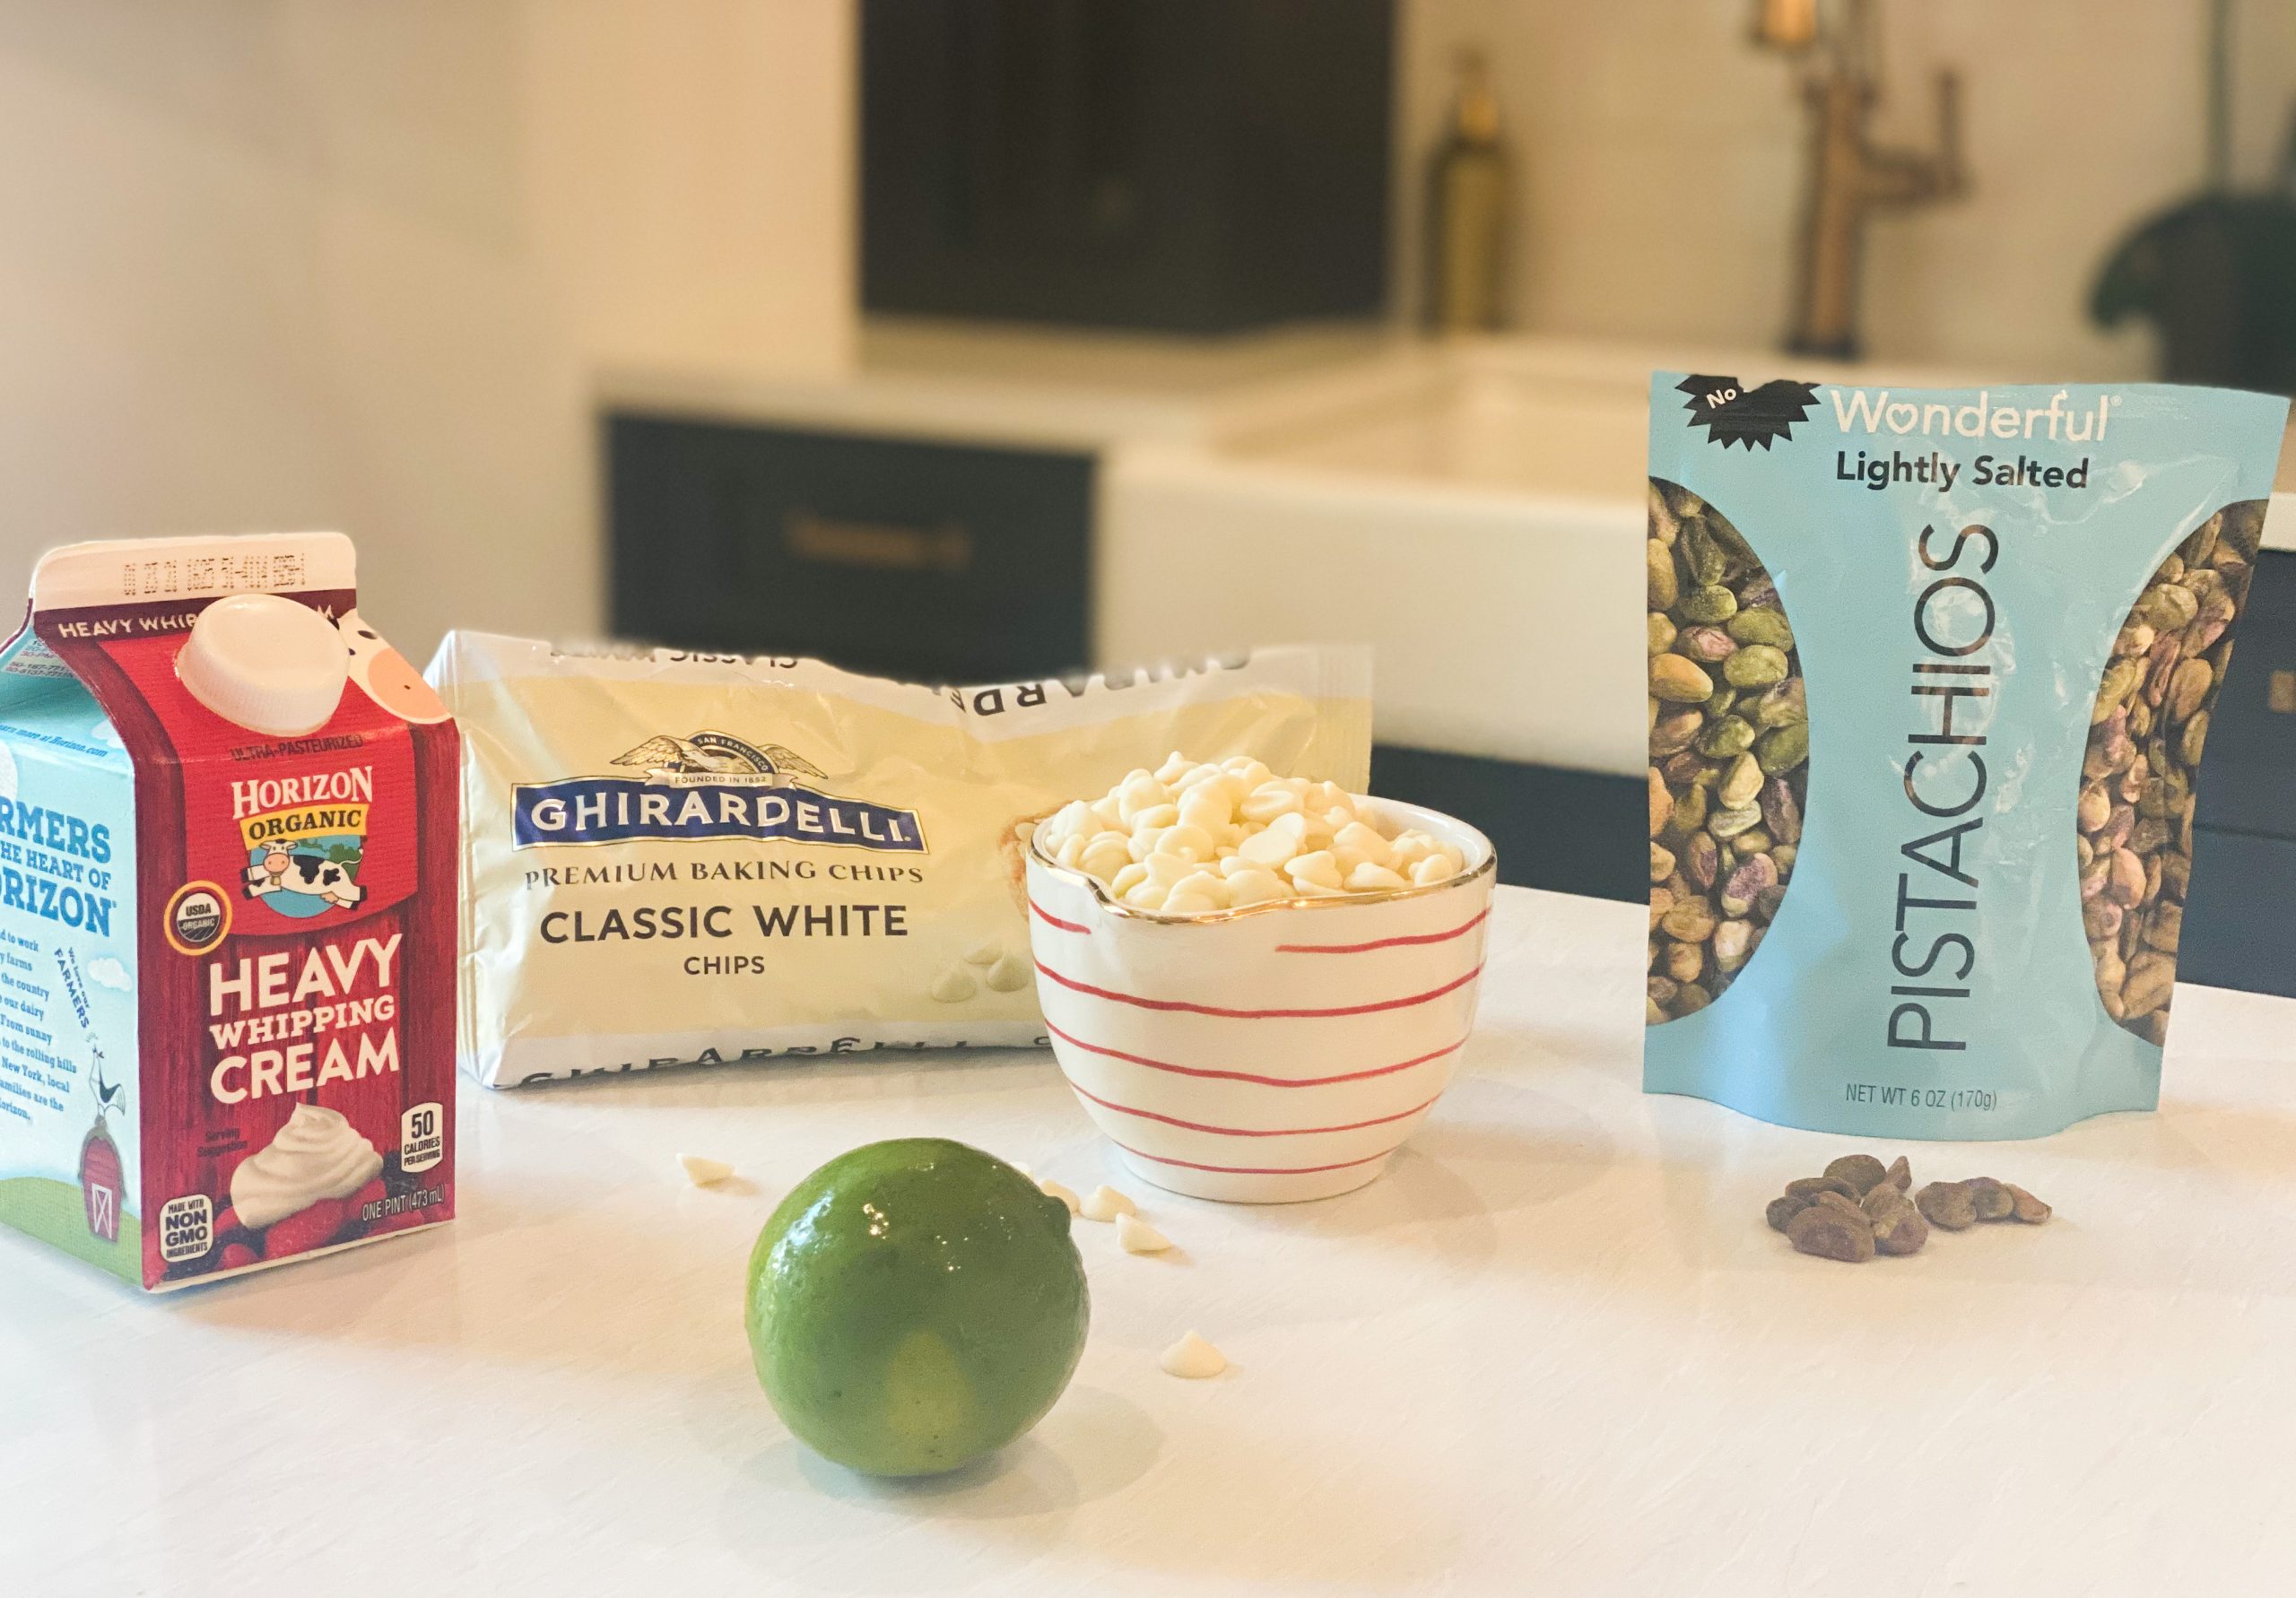 ingredients needed for the White Chocolate Lime Truffles with Pistachios